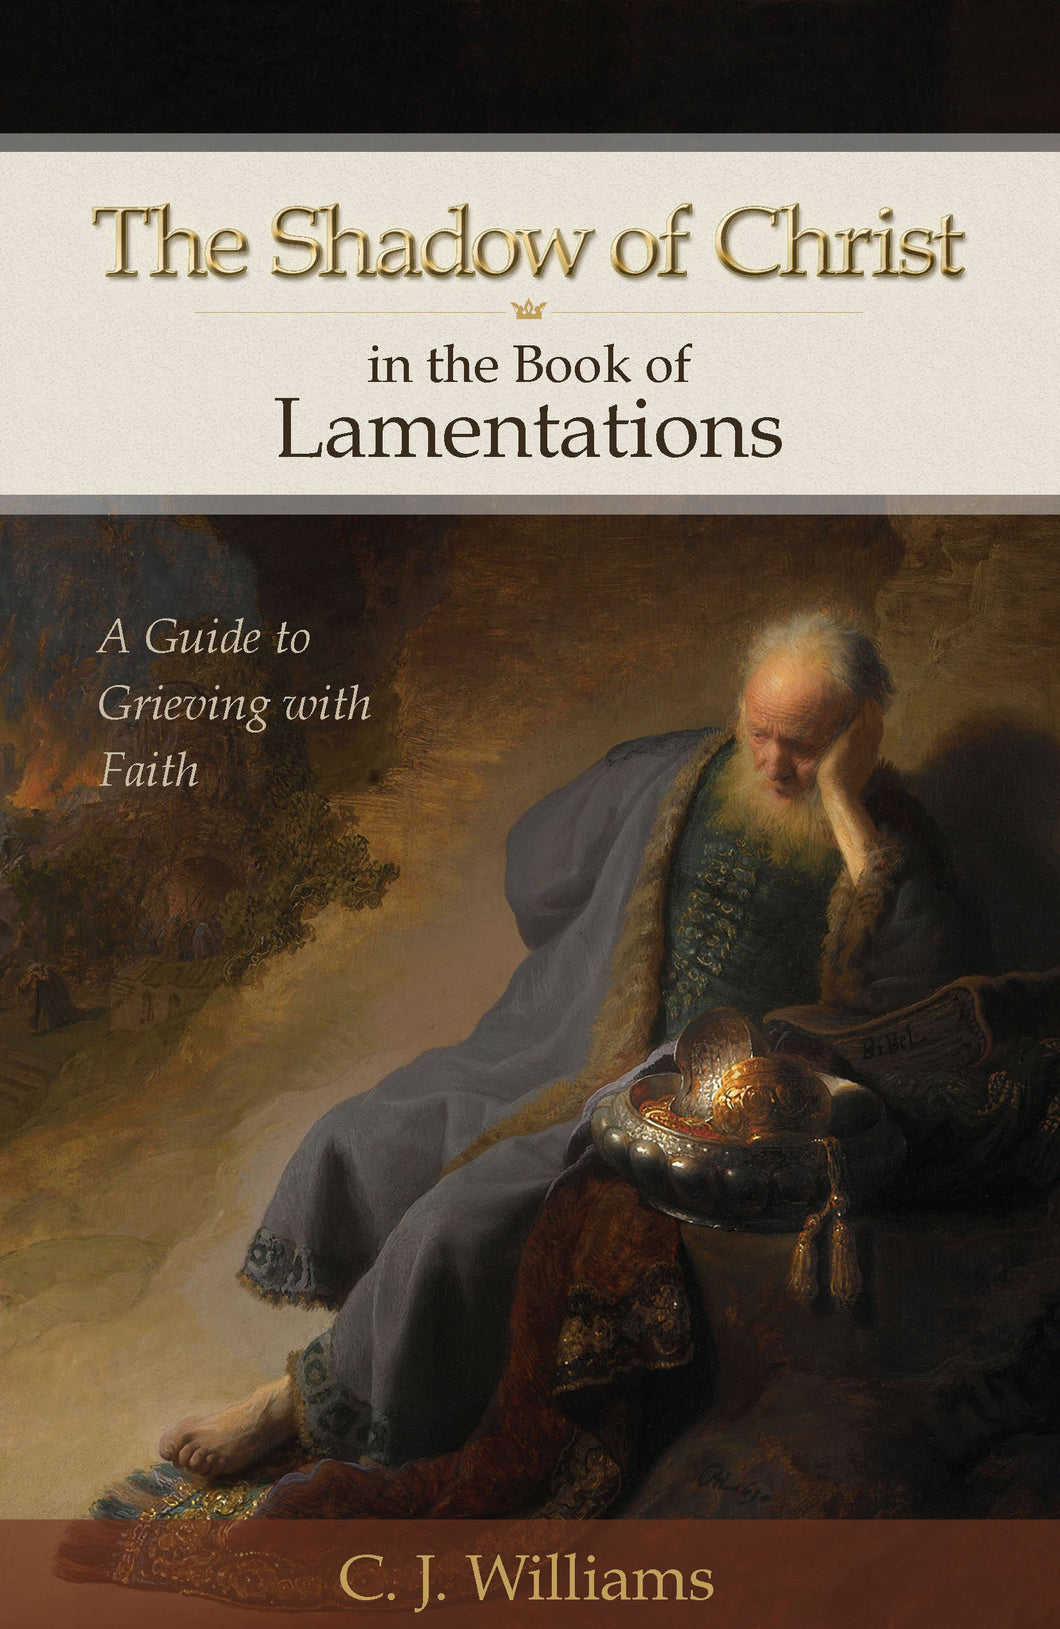 The Shadow of Christ in the Book of Lamentations